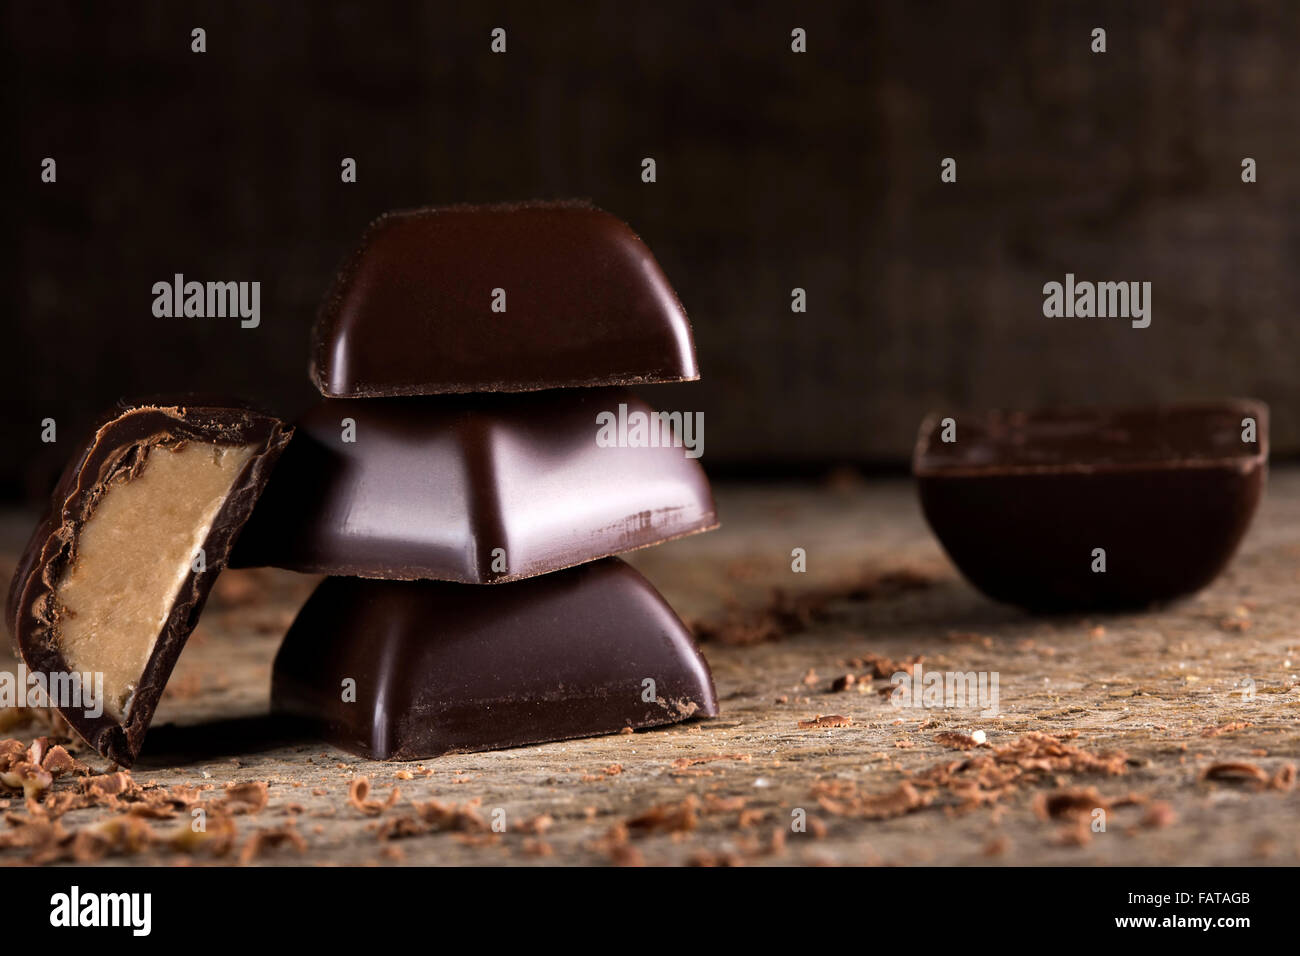 Pile of chocolate pieces on wooden rustic background Stock Photo